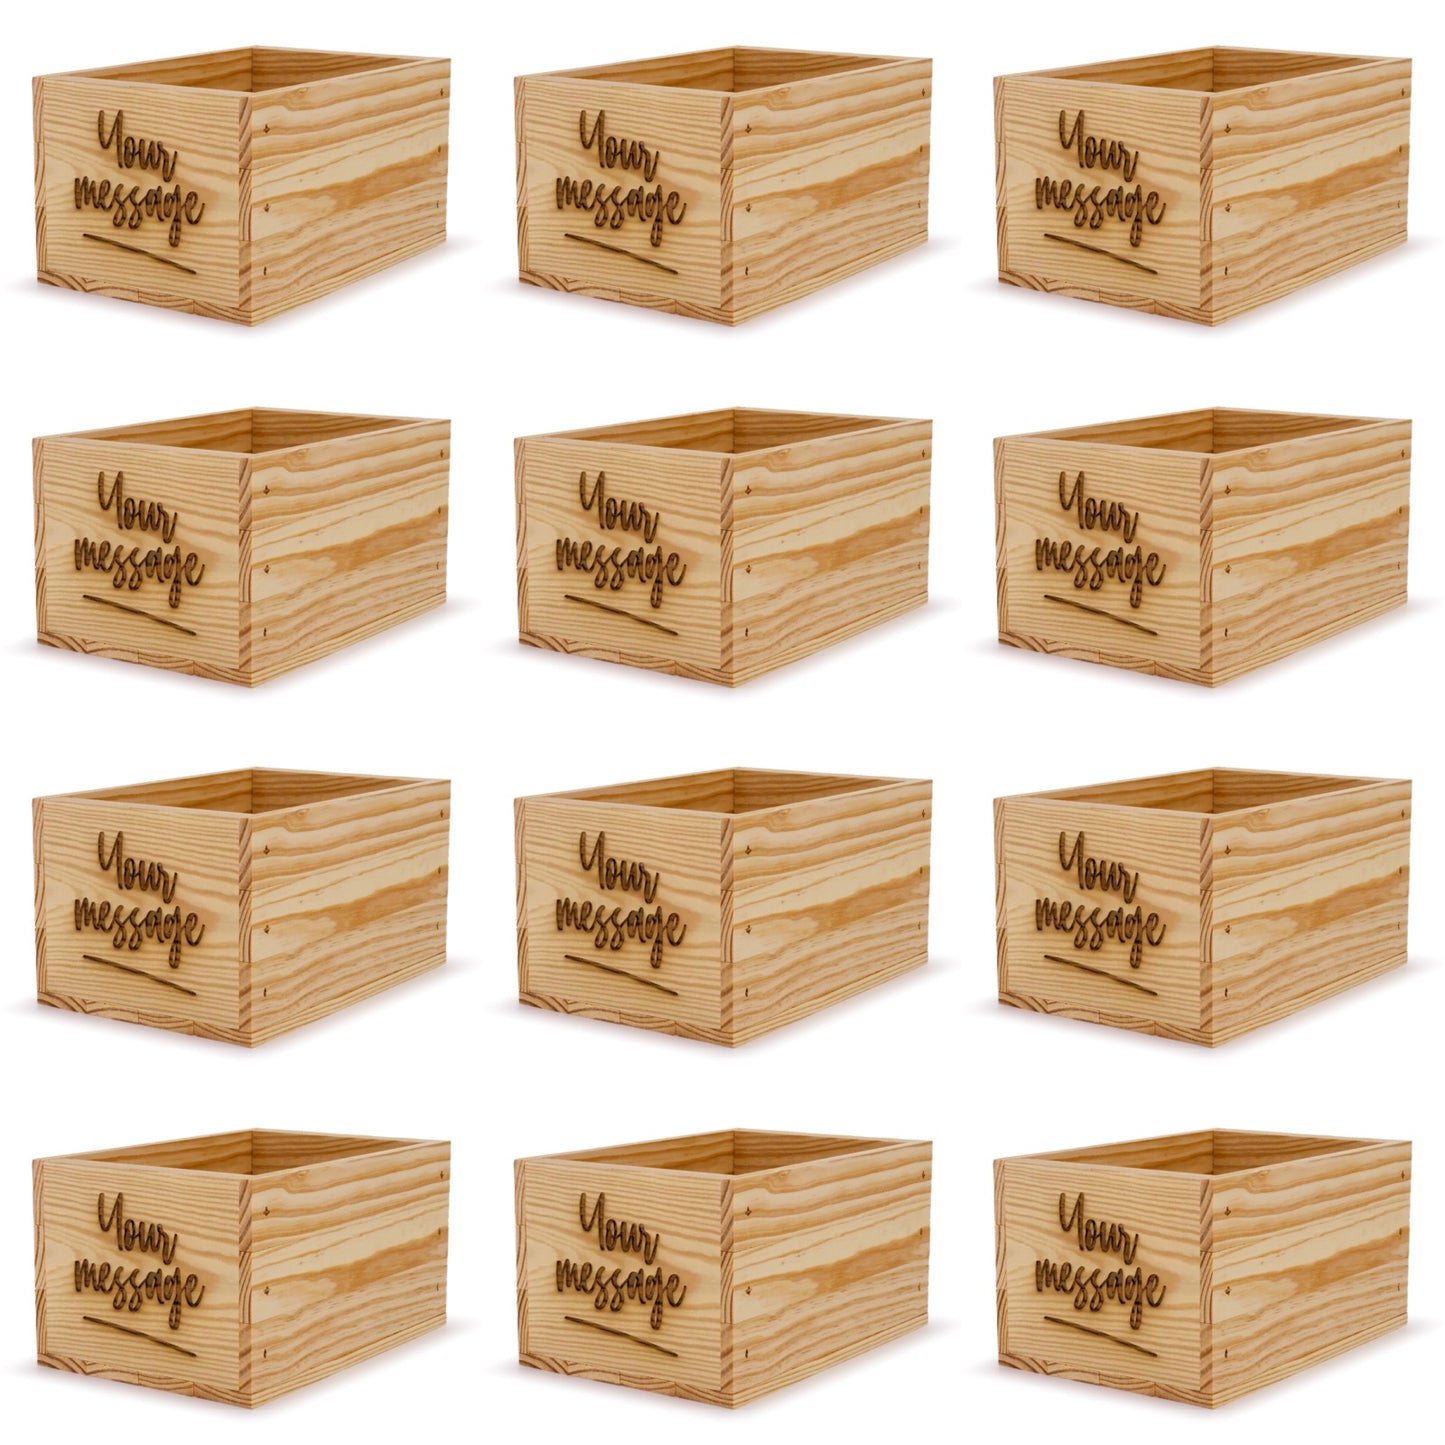 12 Small wooden crates with custom message 9x6.25x5.25